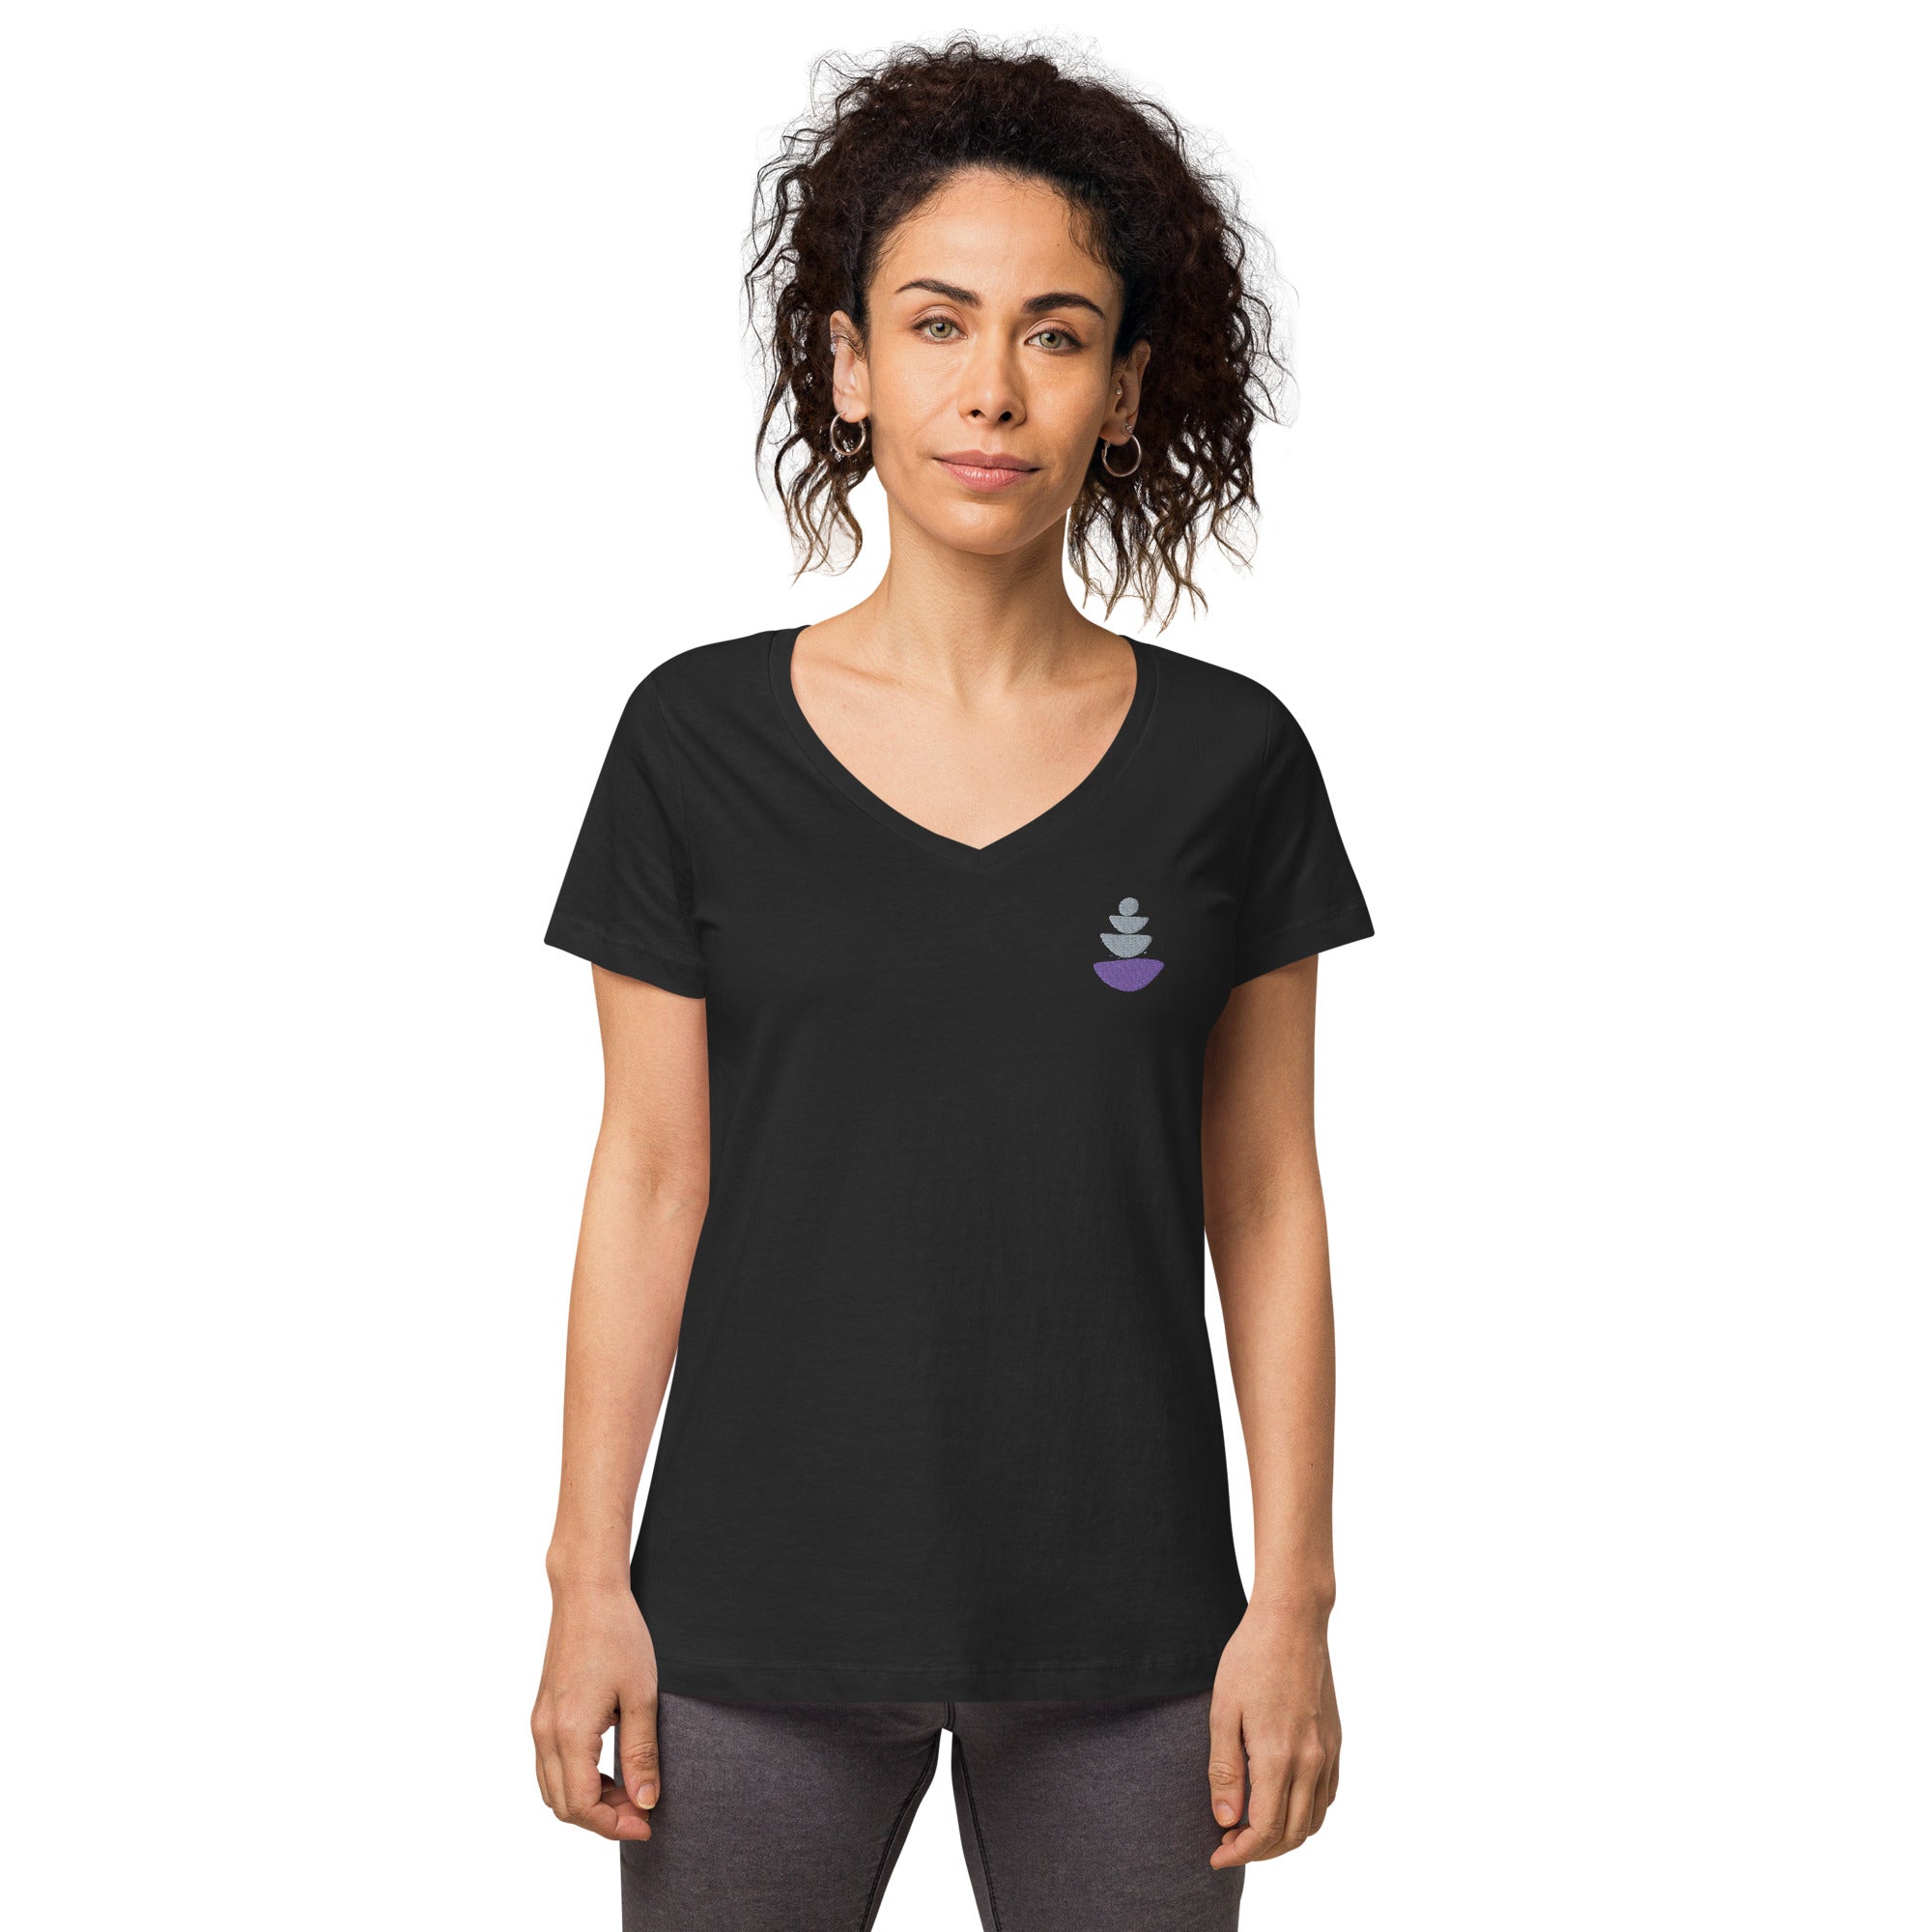 Balanced Lady Women’s fitted v-neck Yoga t-shirt - Personal Hour for Yoga and Meditations 